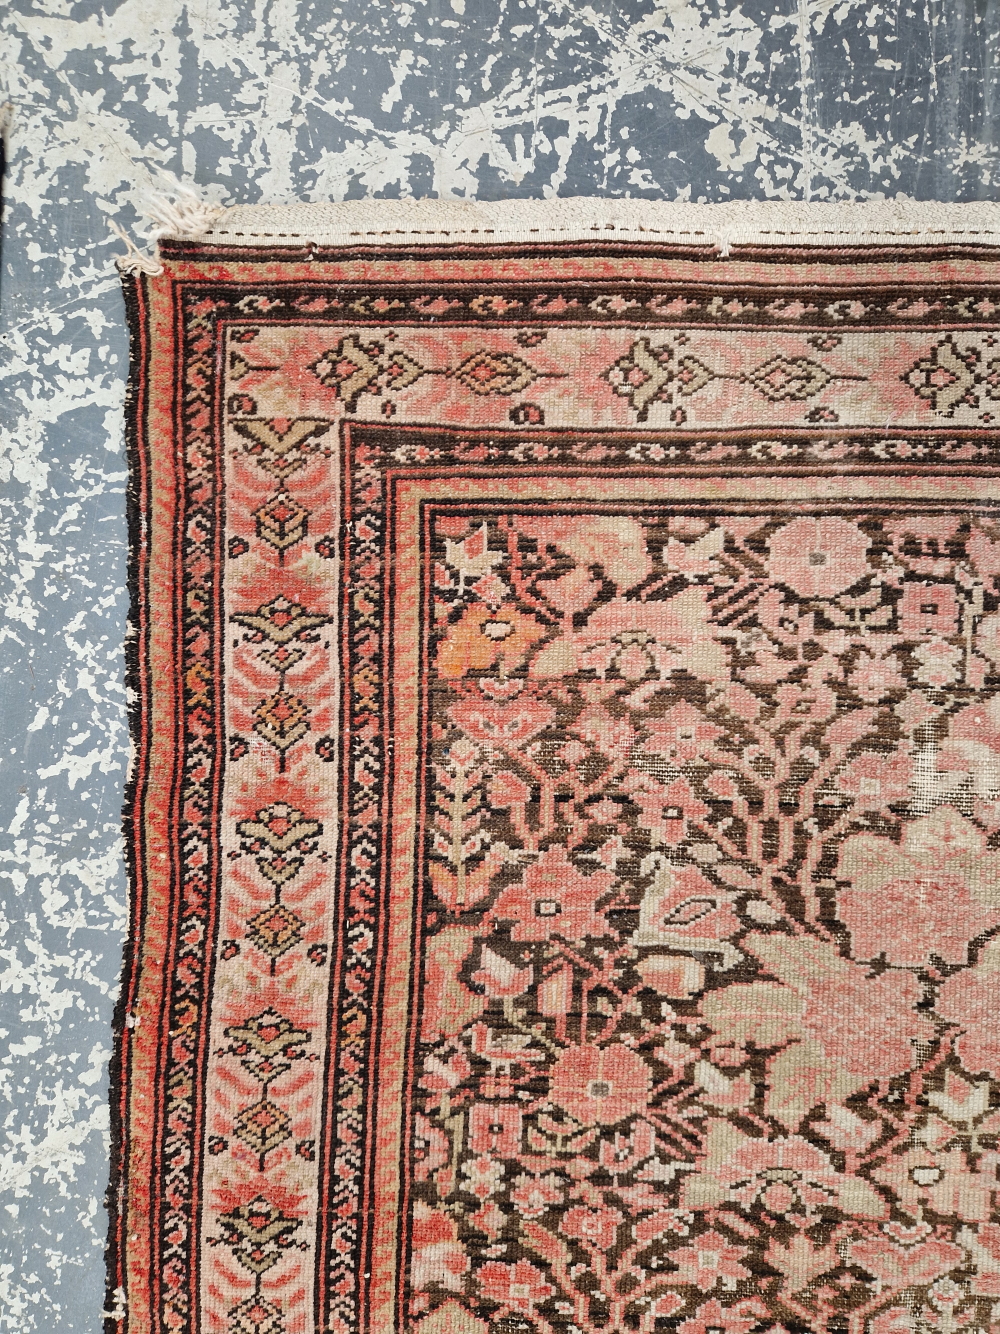 AN ANTIQUE PERSIAN MALAYER RUG 200 x 130 cm. - Image 10 of 10